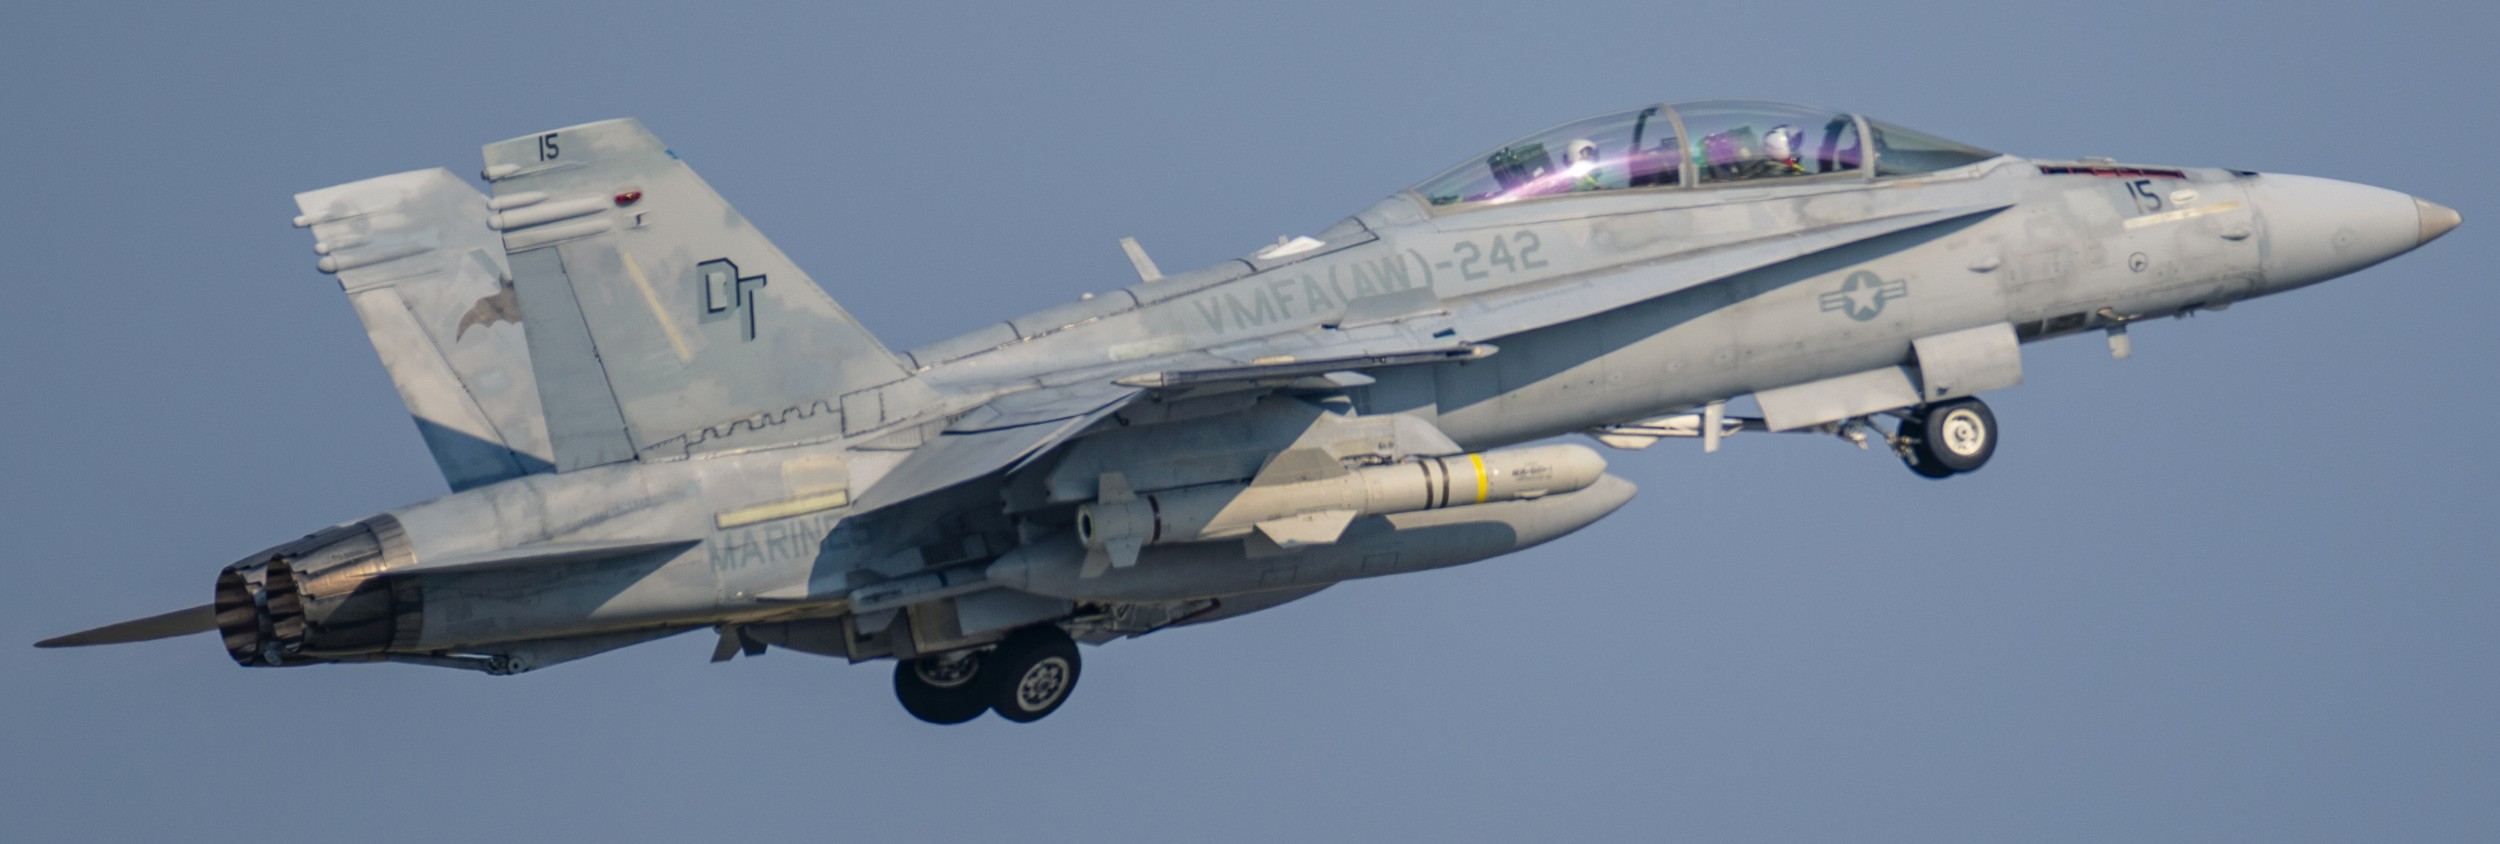 vmfa(aw)-242 bats marine all-weather fighter attack squadron usmc f/a-18d hornet 111